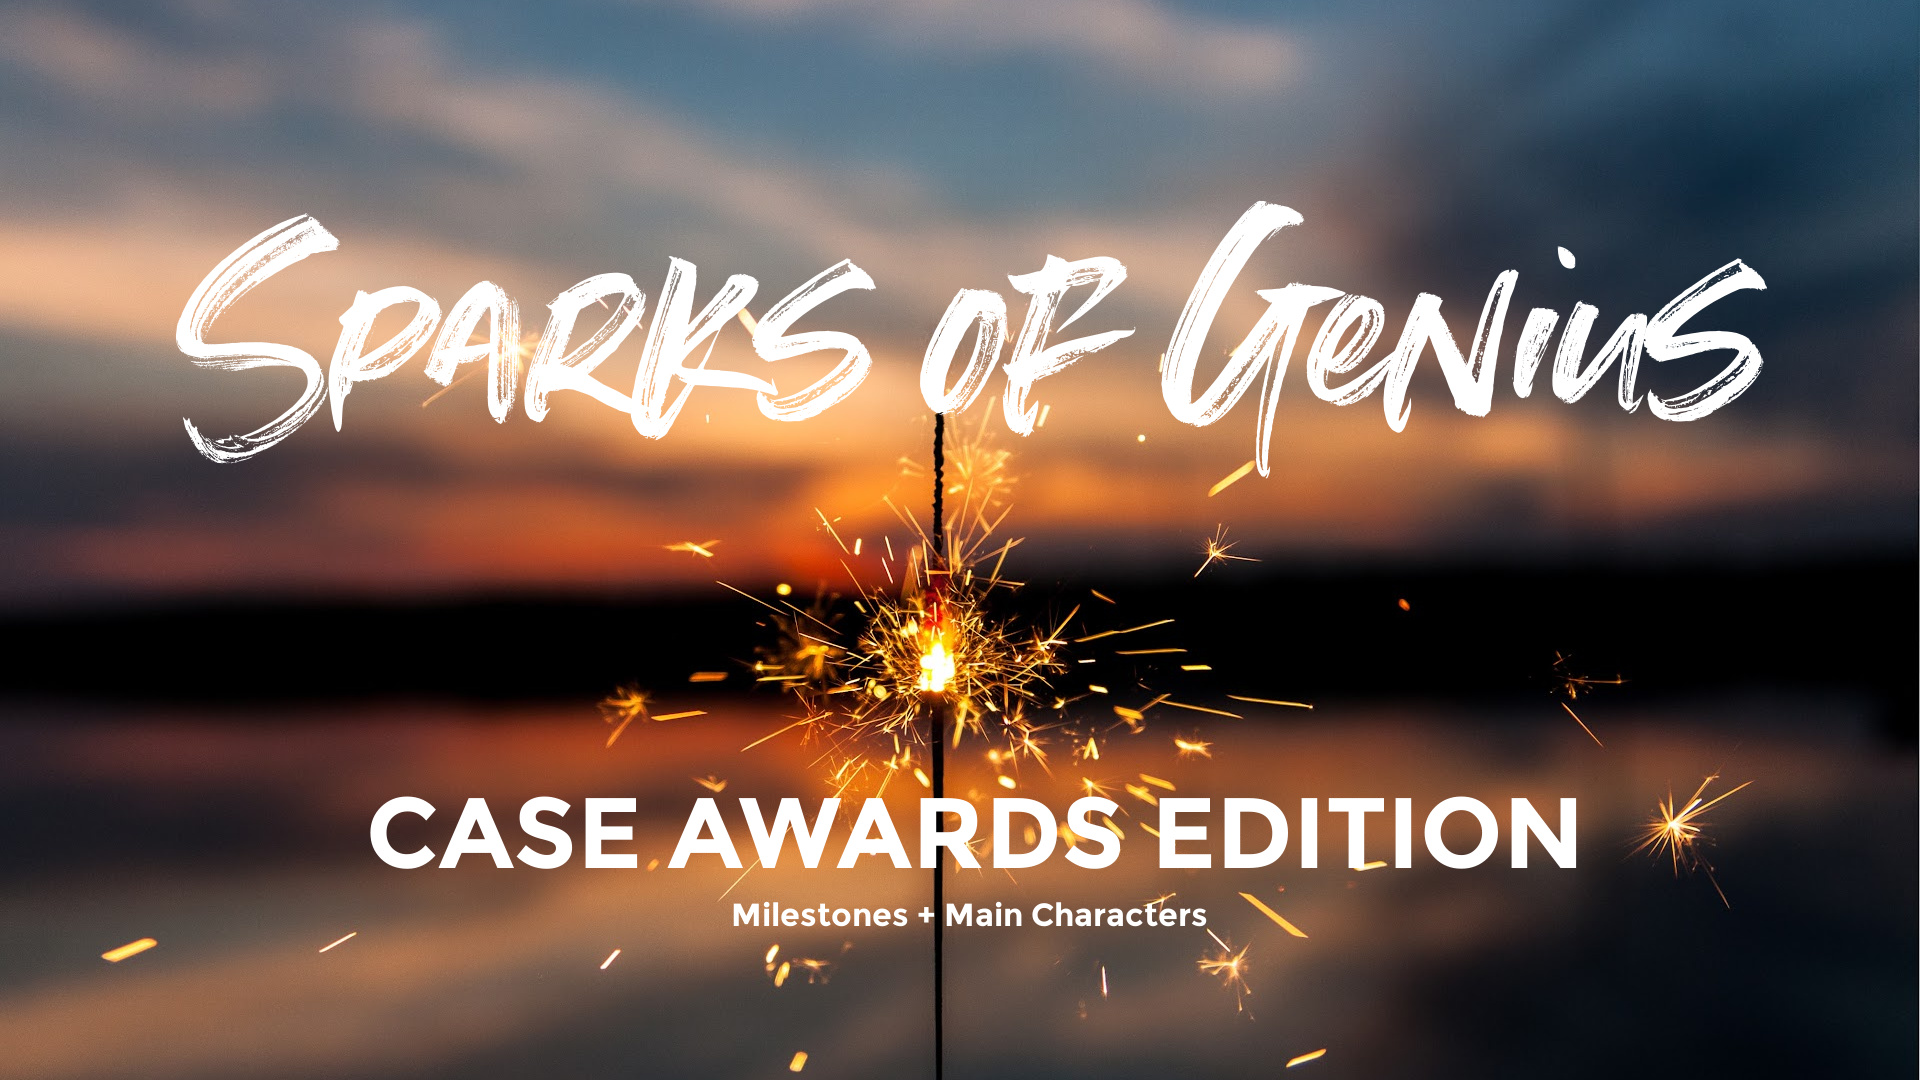 Text: Sparks of Genius CASE Awards Edition - Milestones + Main Characters; Image: Sunset with lit sparkler